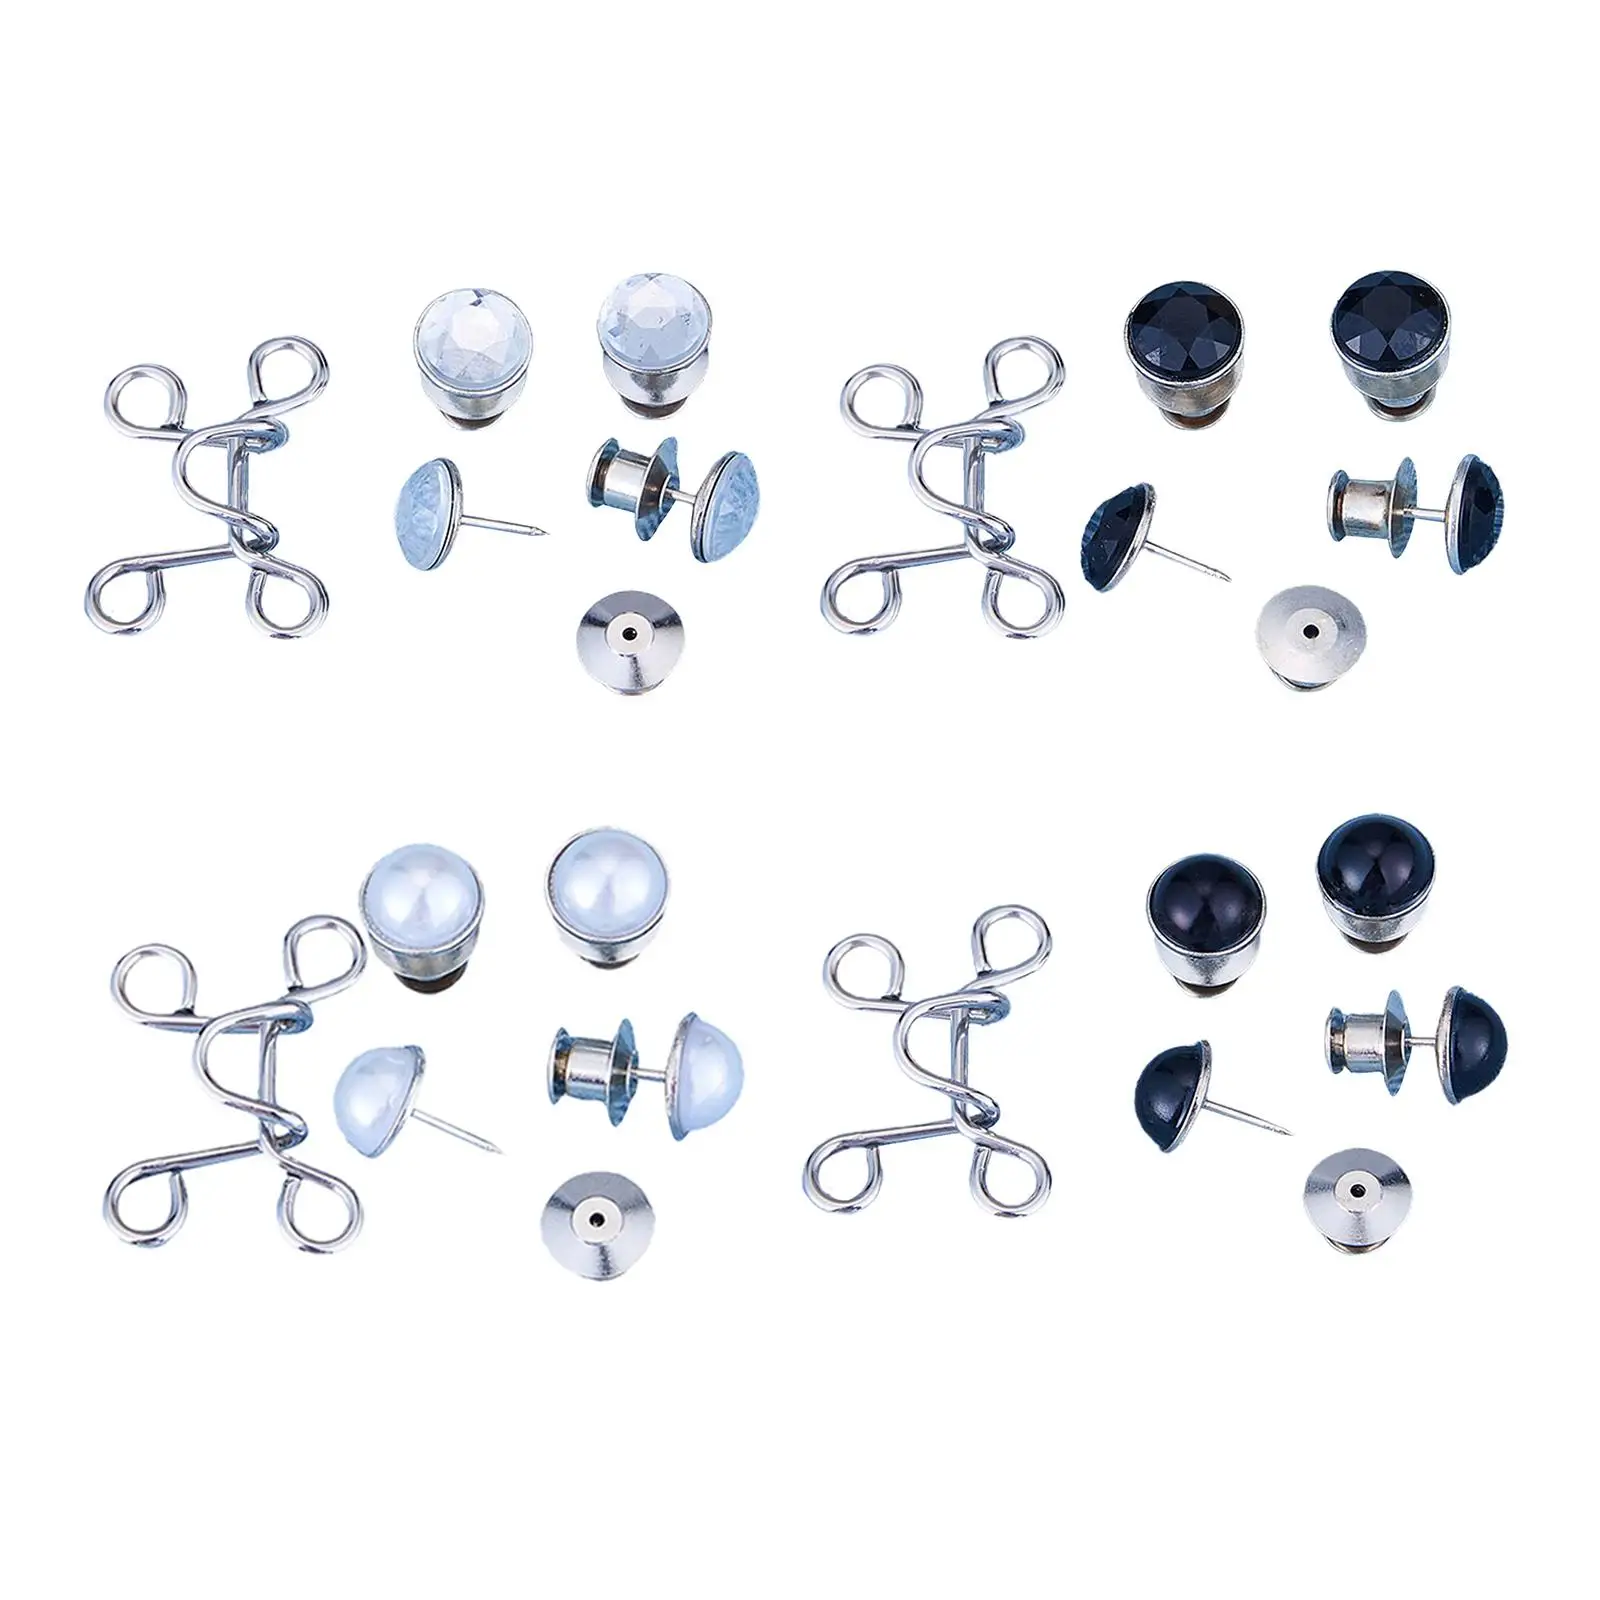 Sewing Hooks and Eyes Closure Metal Crafts Pearl Rhinestone Buttons Bra Pants